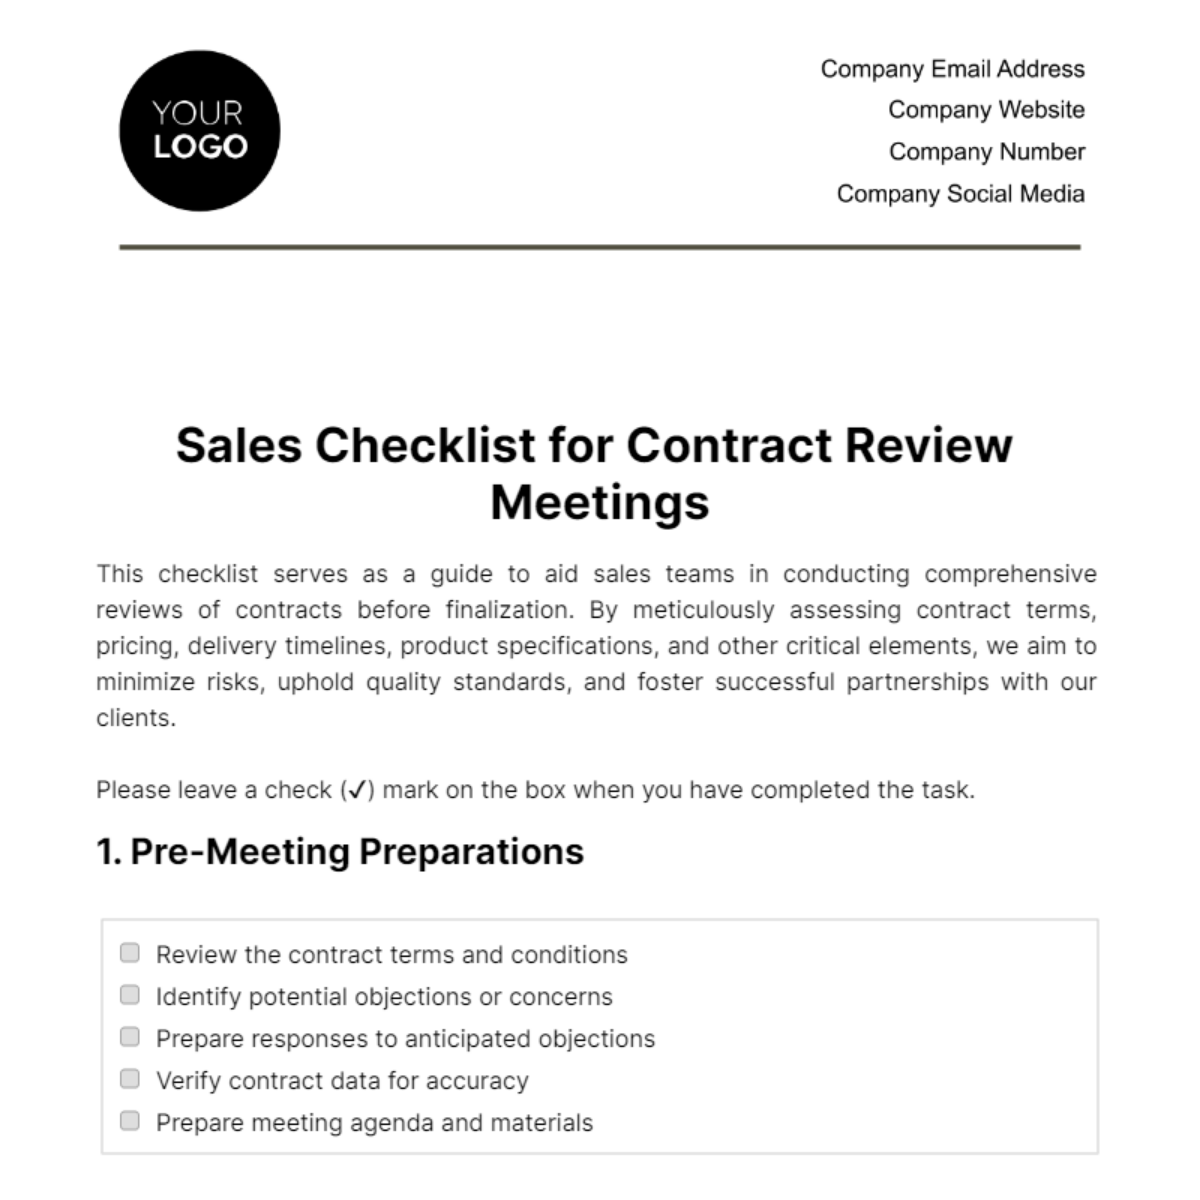 Free Sales Checklist for Contract Review Meetings Template